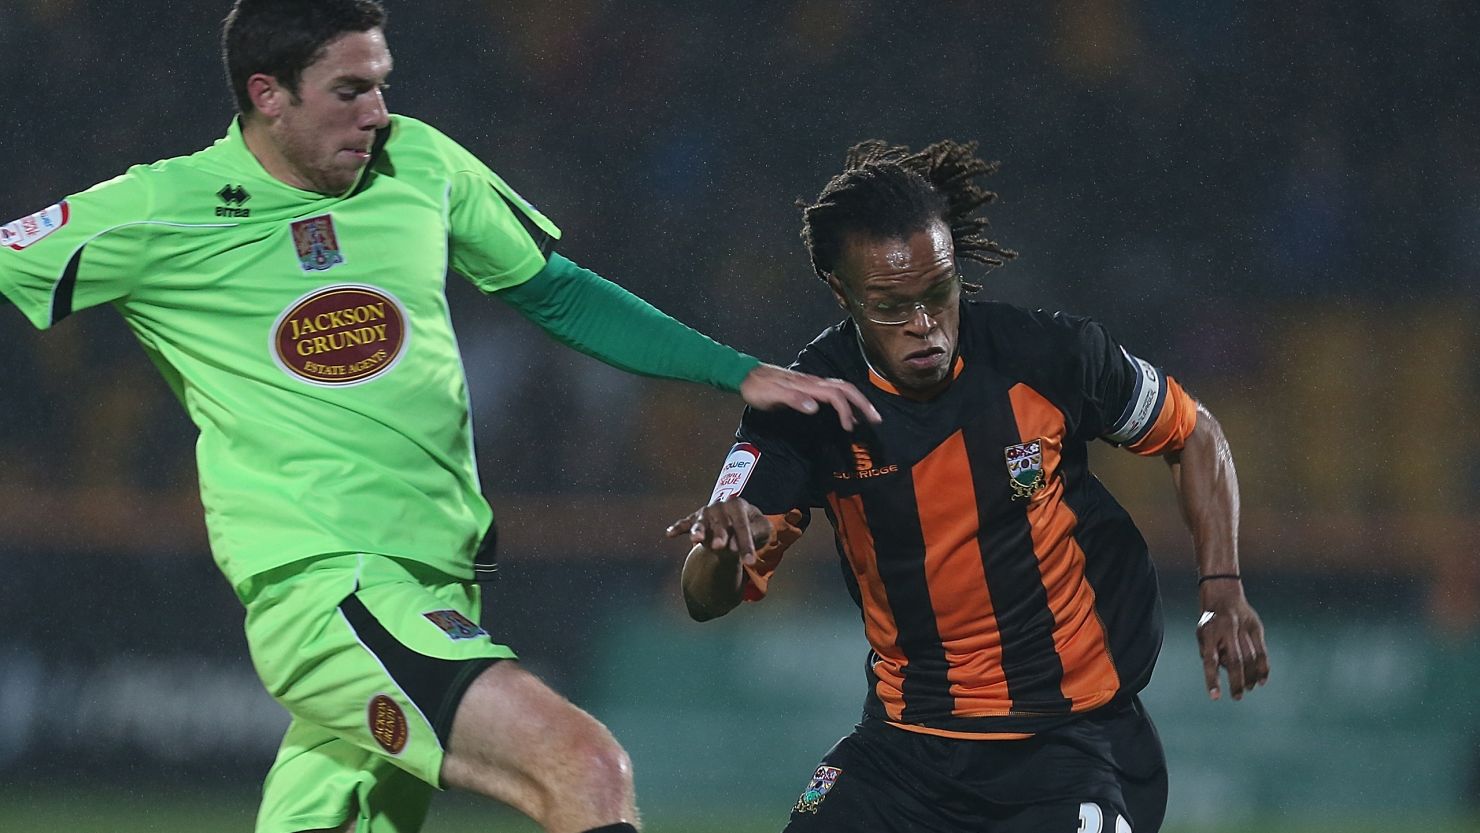 Edgar Davids made a return to action in Barnet's victory over Northampton in England's League Two.